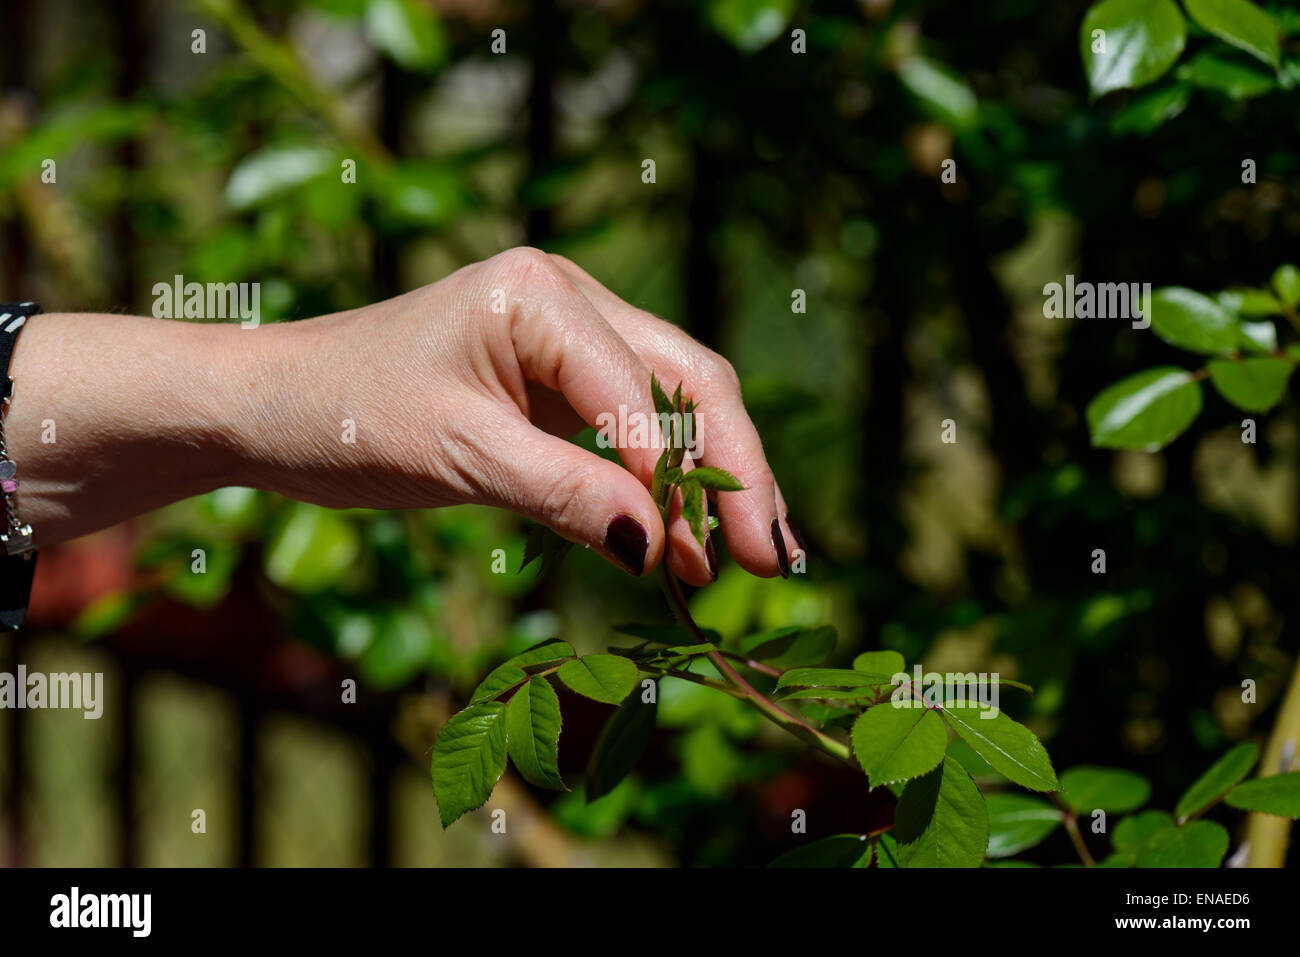 Hand touching leaves of a plant in garden Stock Photo